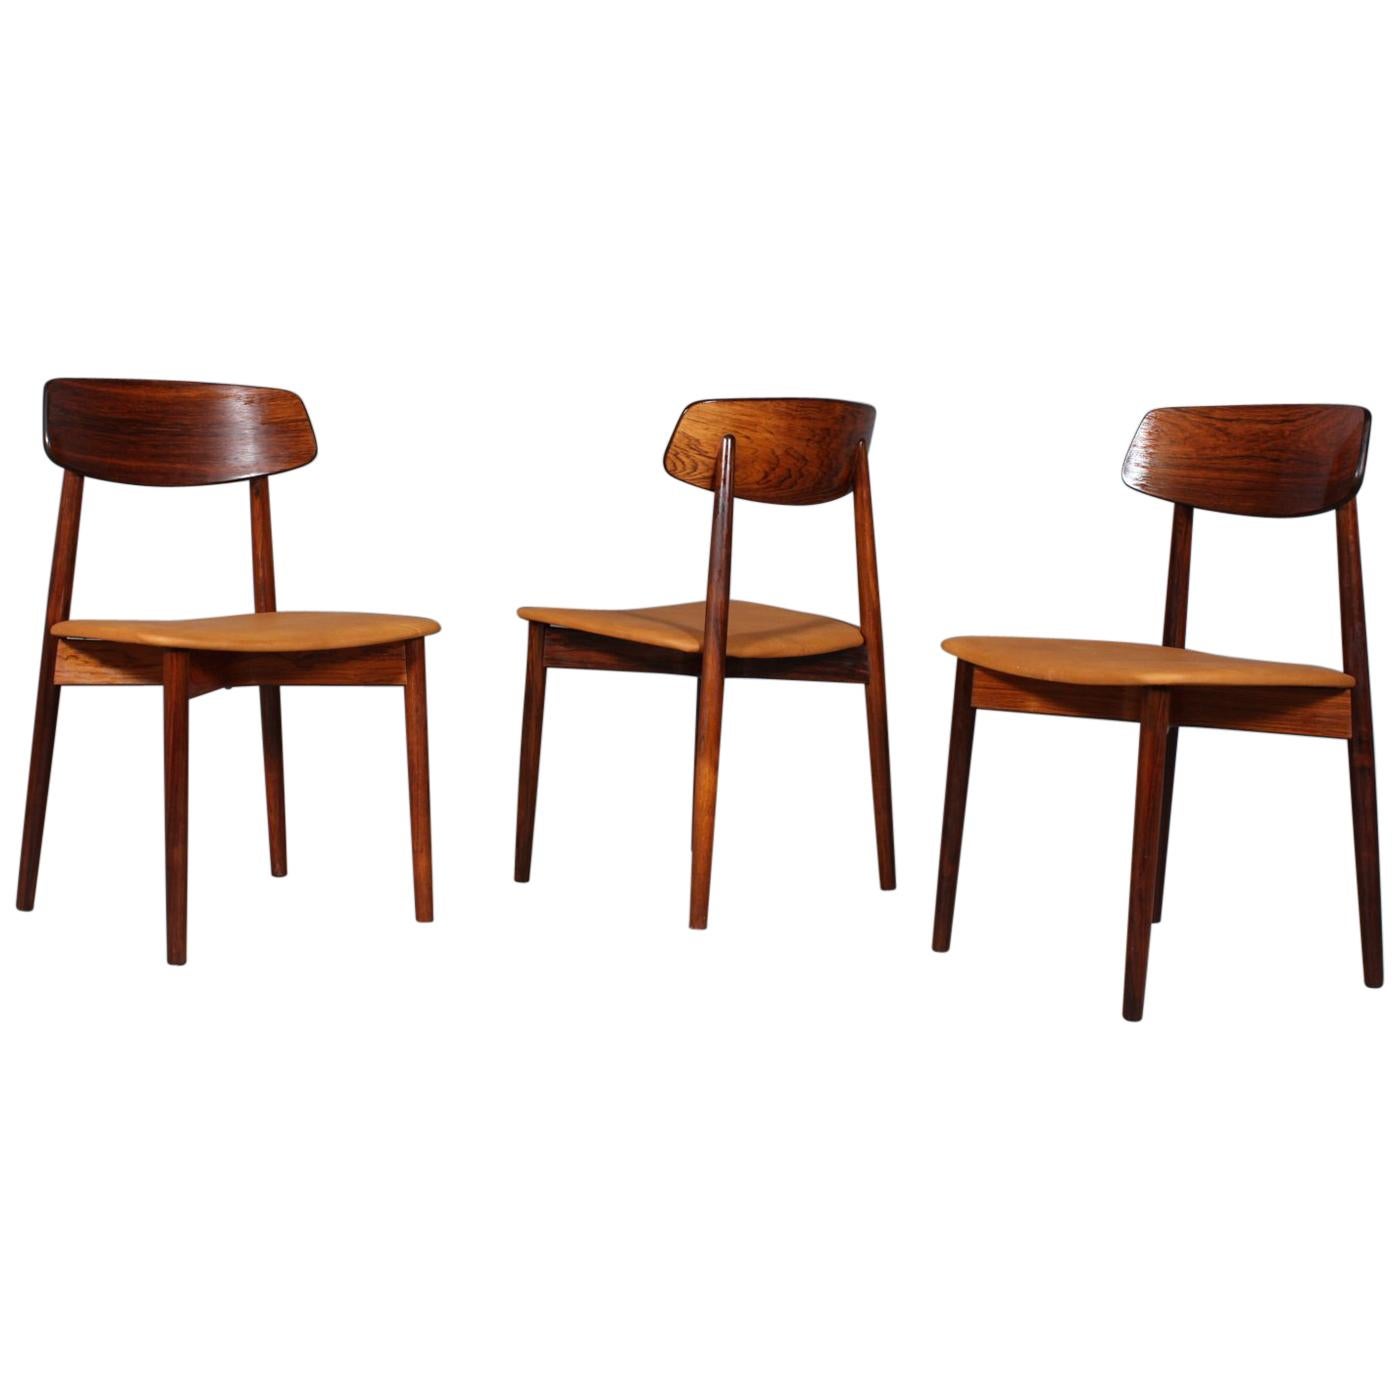 Harry Østergaard, Three Chairs in Rosewood and Nubuck Leather, 1960s